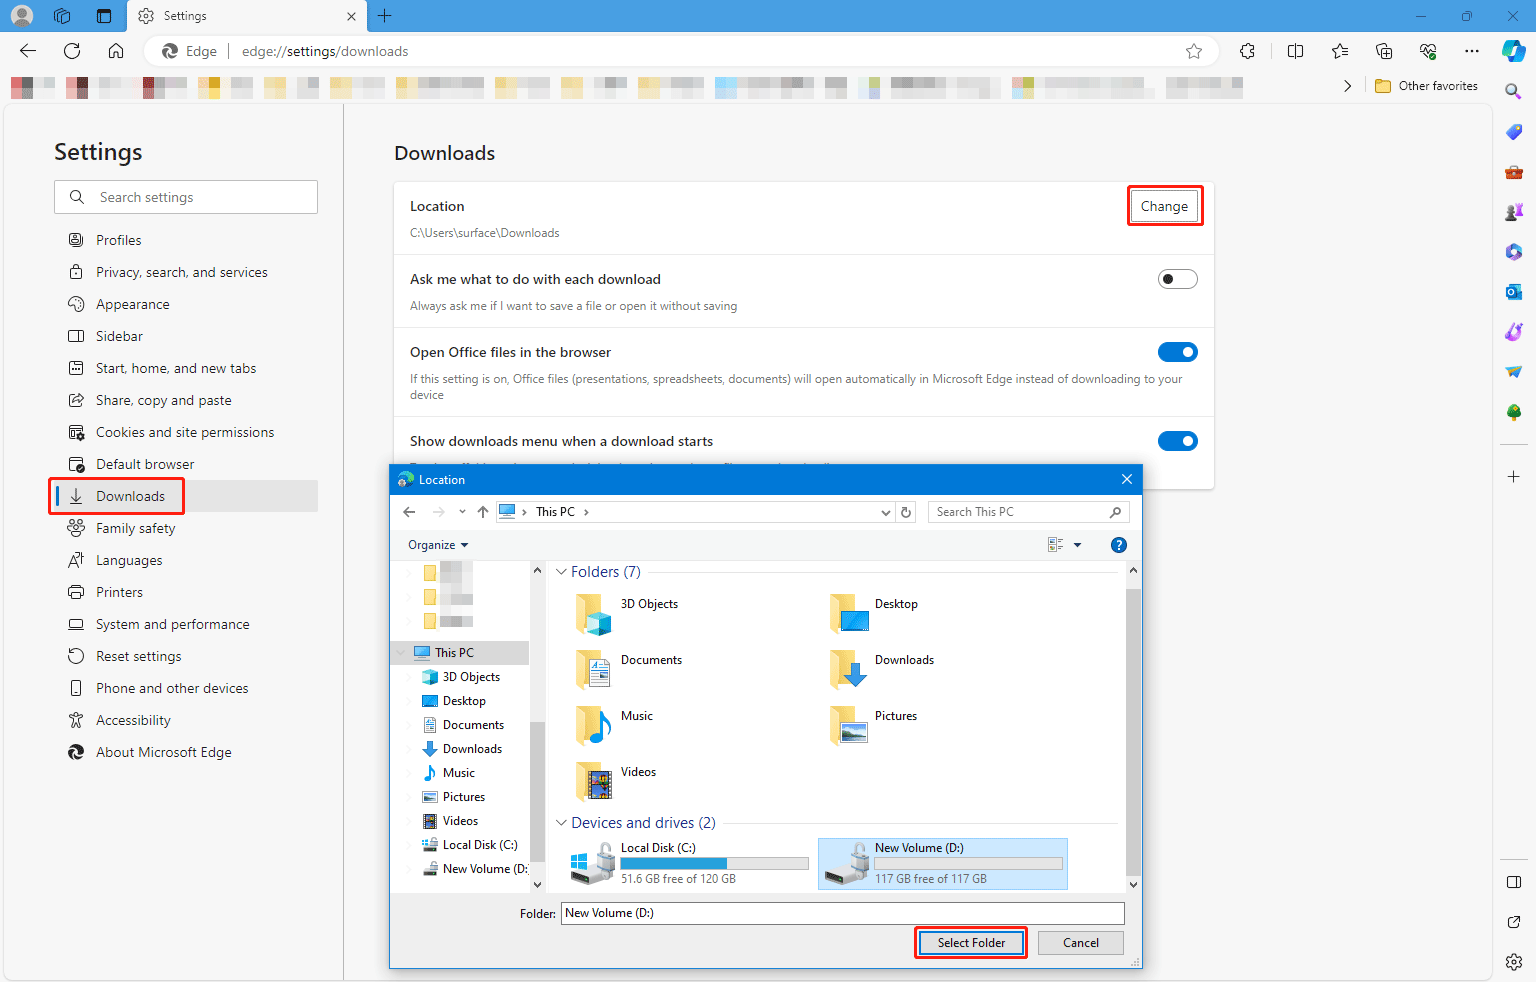 select the Downloads folder to set it as the Downloads folder in Edge